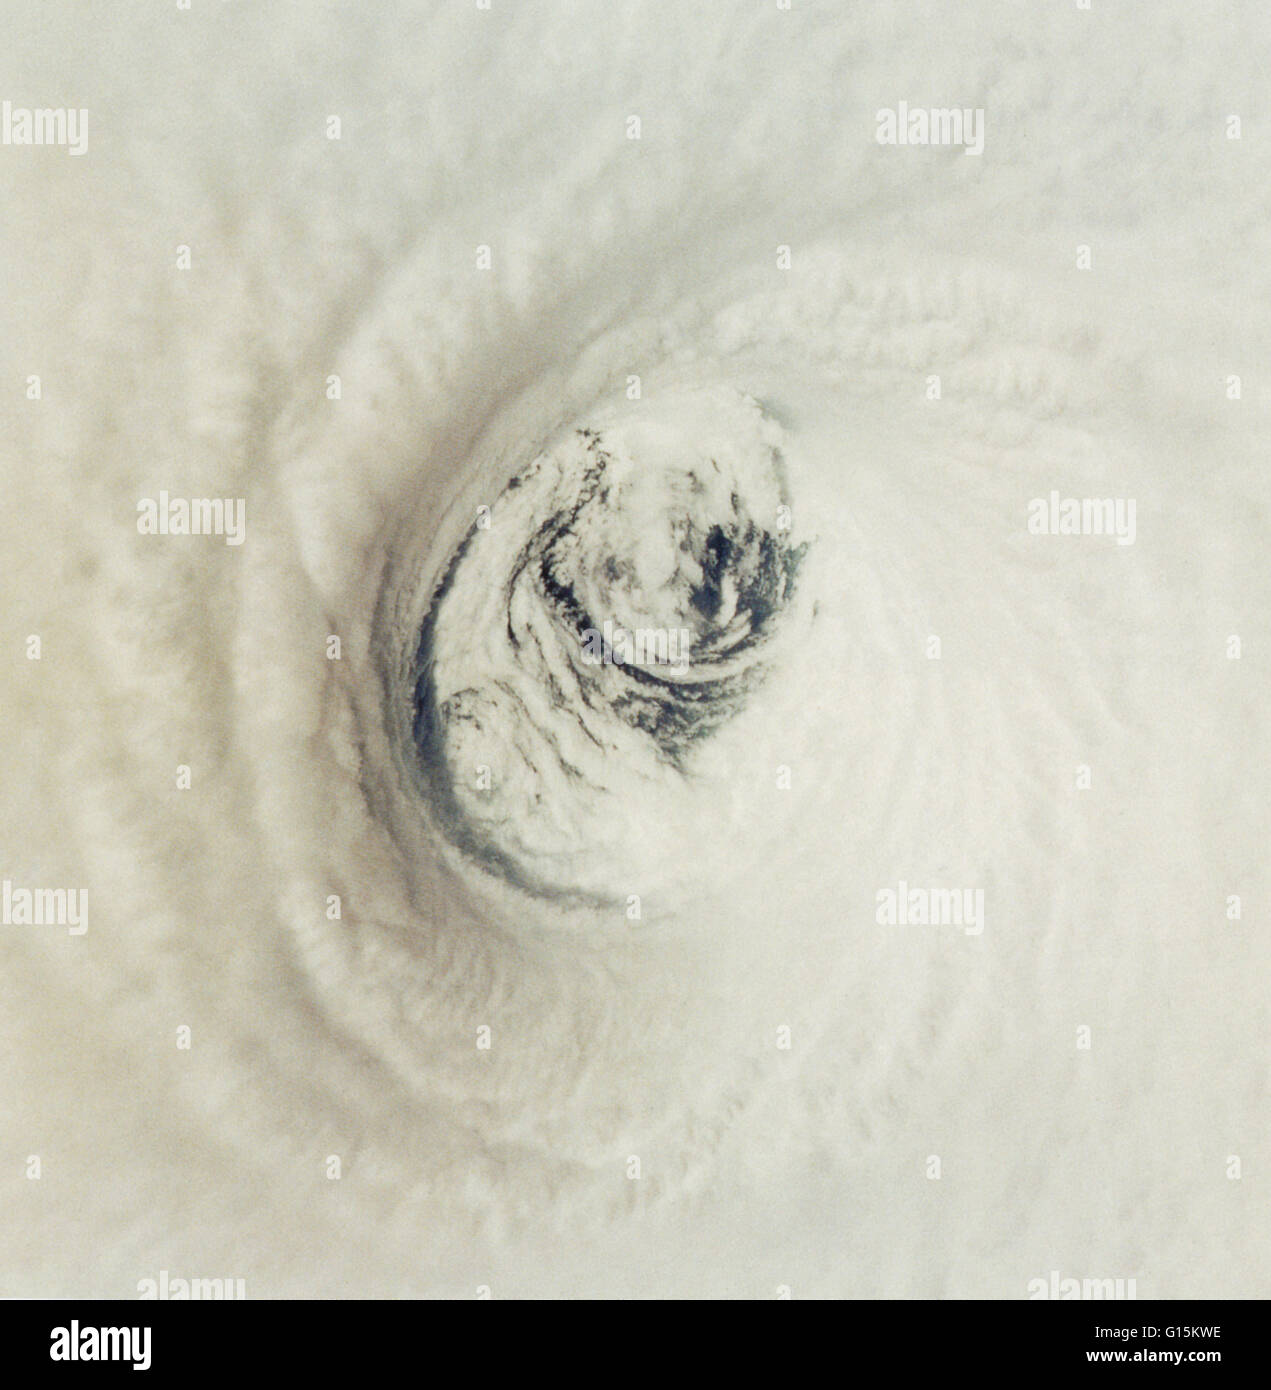 The eye of Hurricane Emilia over the eastern North Pacific, as seen from directly above by the crew of the space shuttle Columbia on July 19th, 1994, at 19:33 UT. At this time, Emilia had maximum winds of 70 m/sec (155 mph). Stock Photo